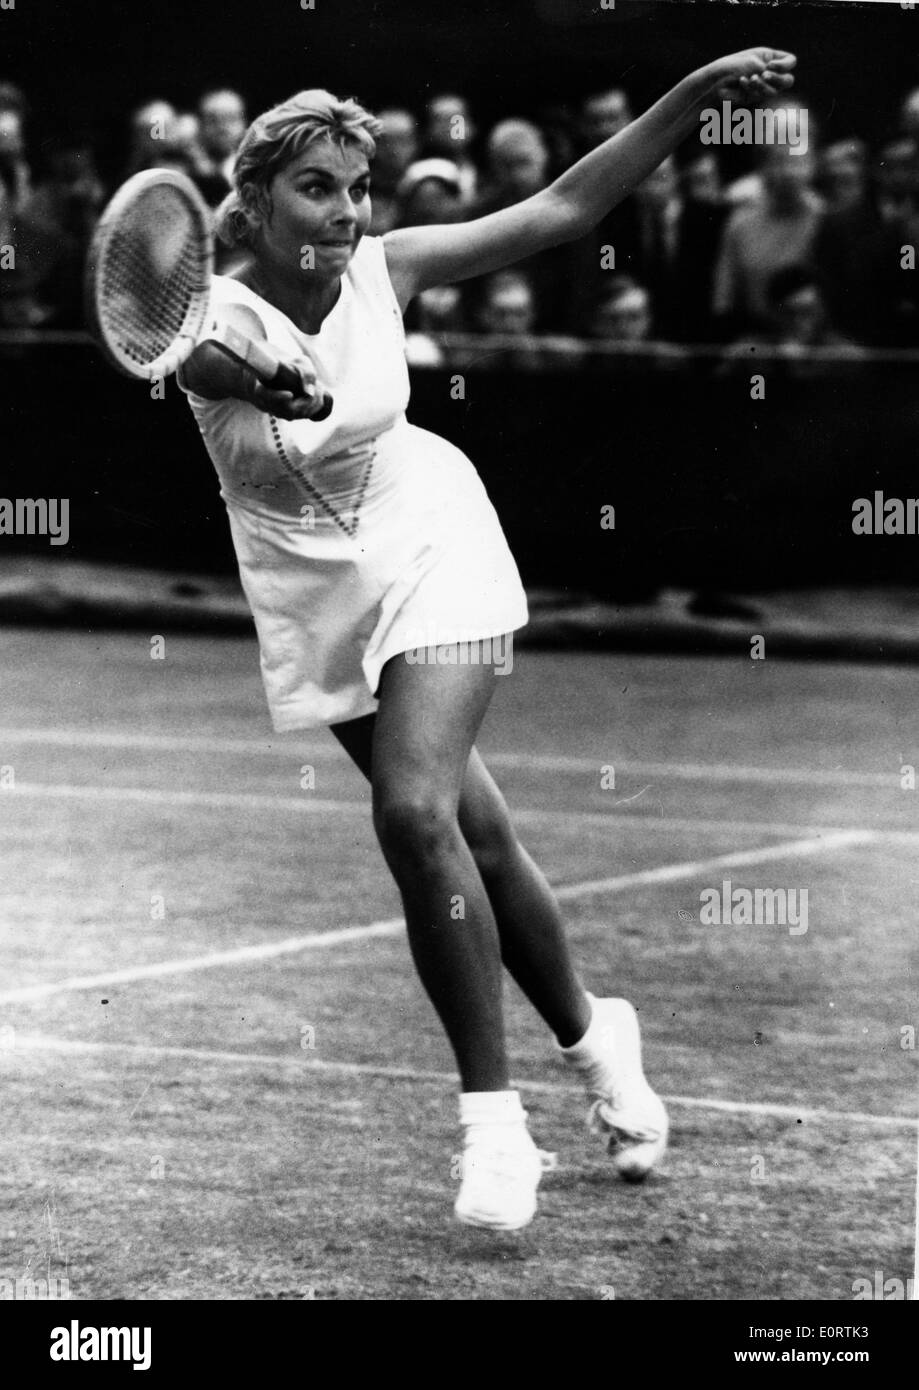 Tennis pro Karol Fageros compete in match Foto Stock